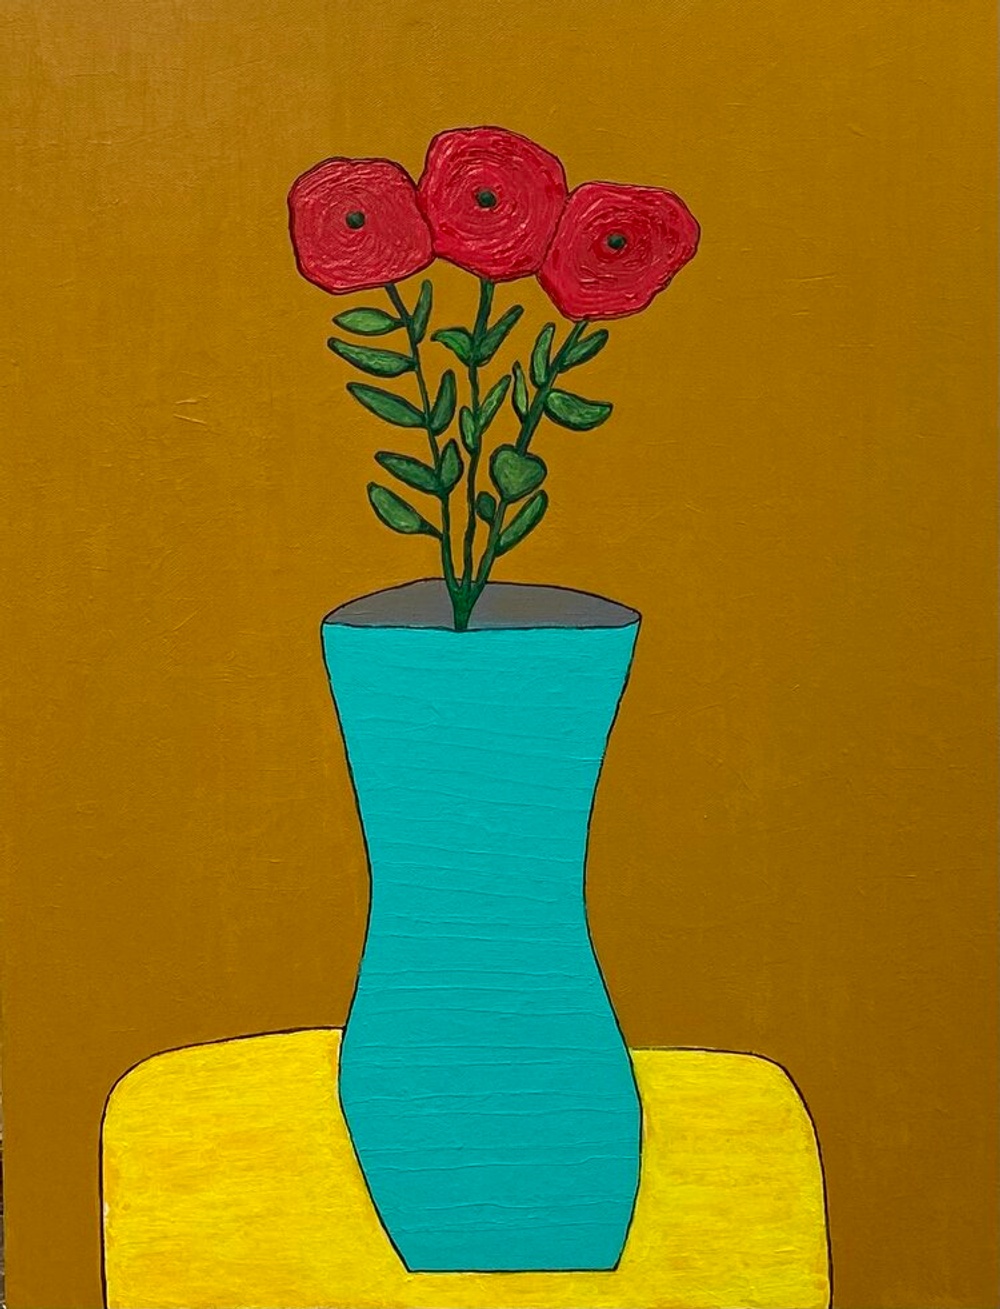 Red Flowers with Teal Vase